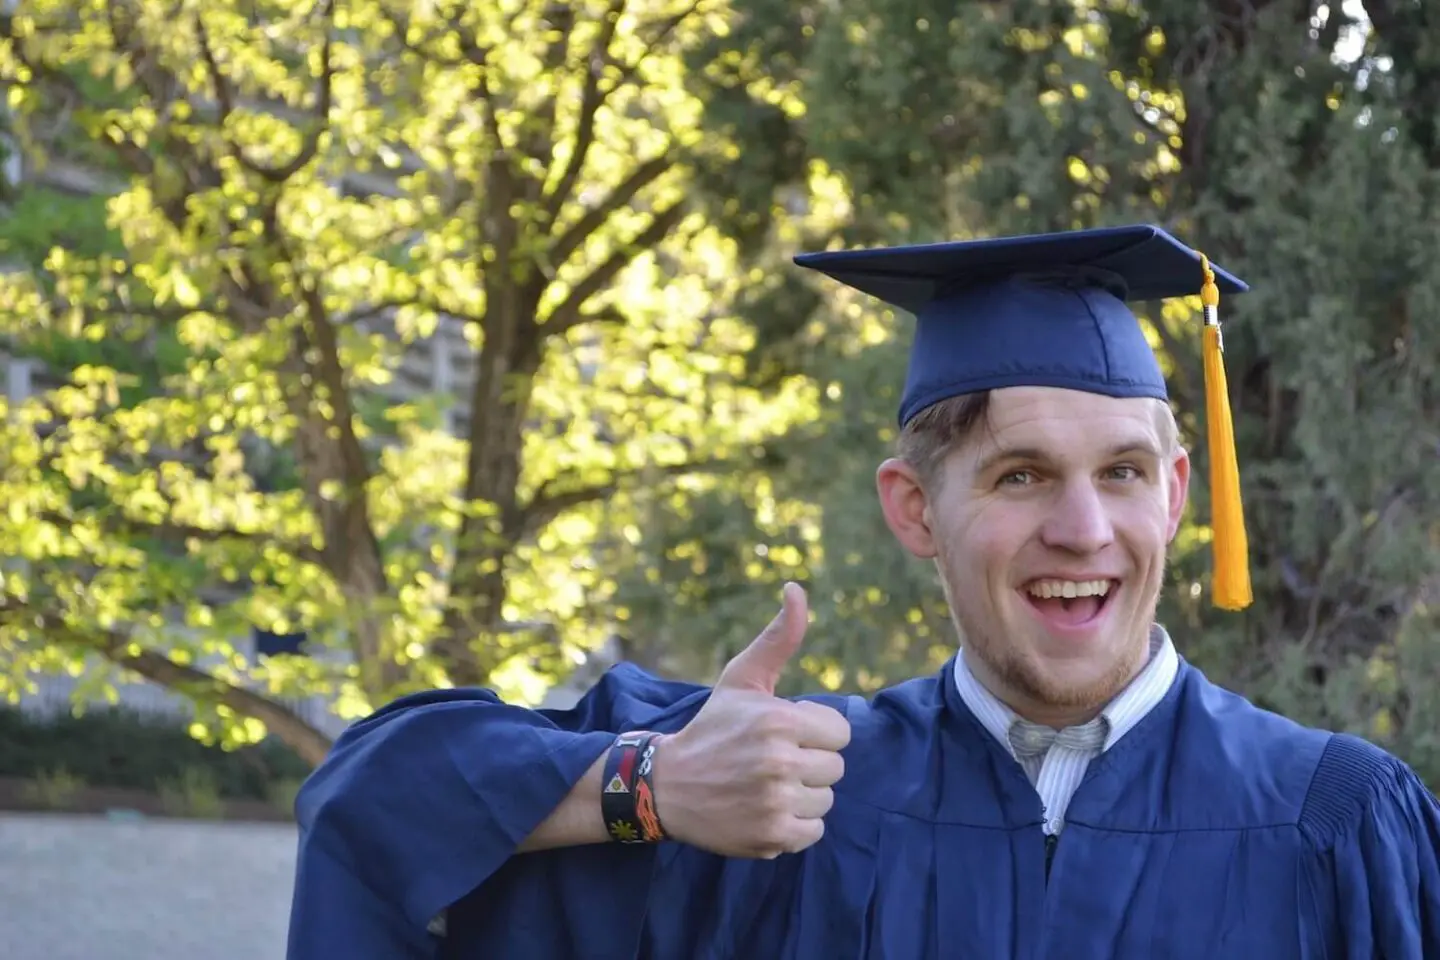 A man in a blue cap and gown giving a thumbs up